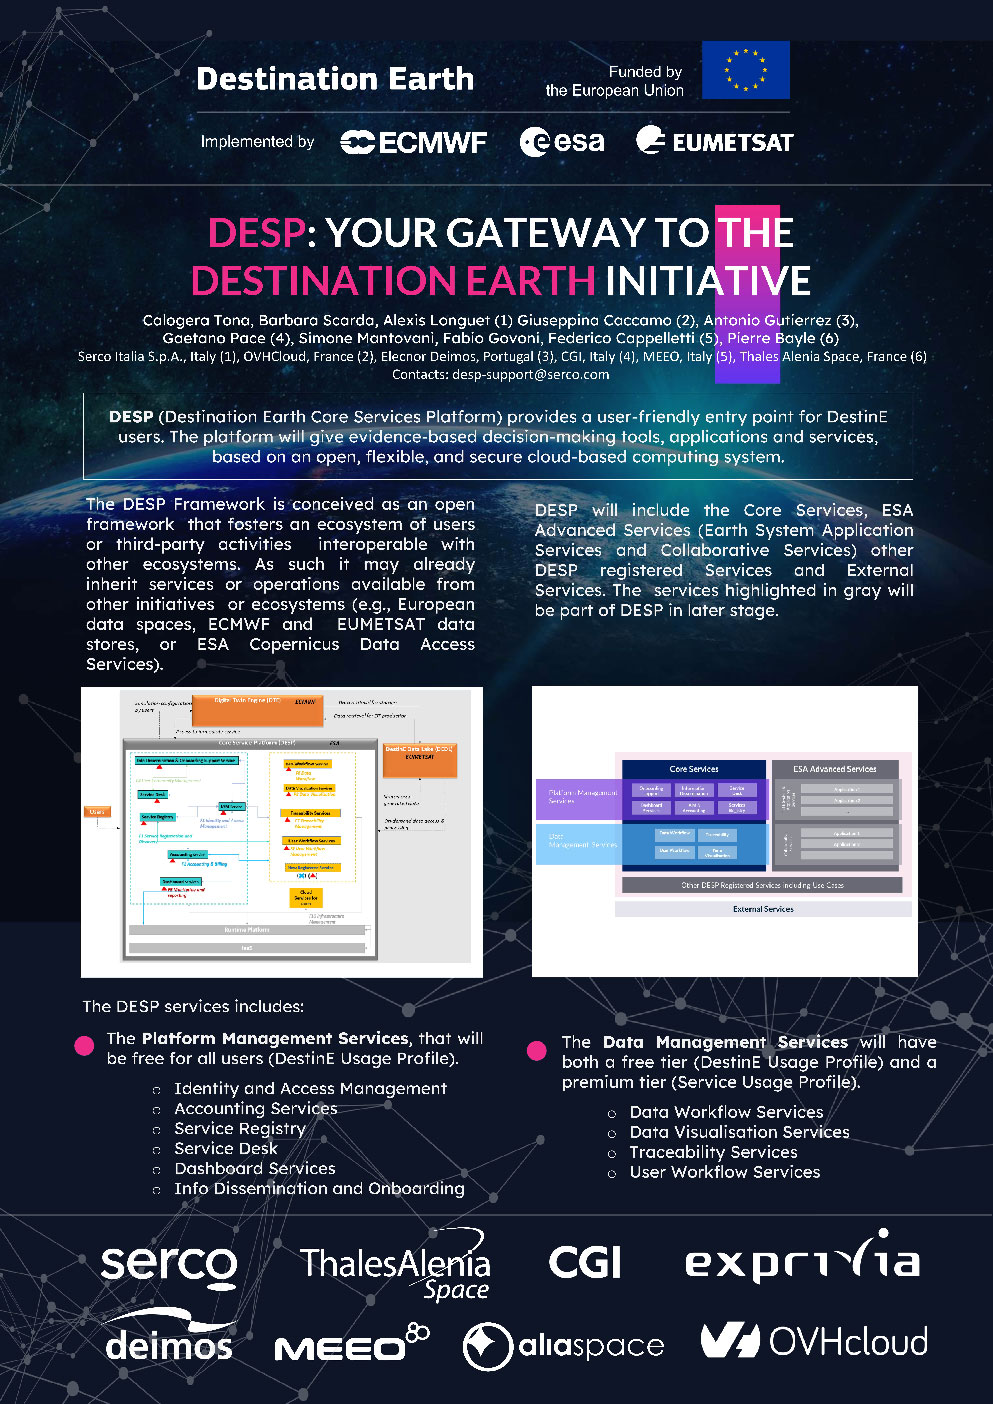 DESP YOUR GATEWAY TO THE DESTINATION EARTH INITIATIVE